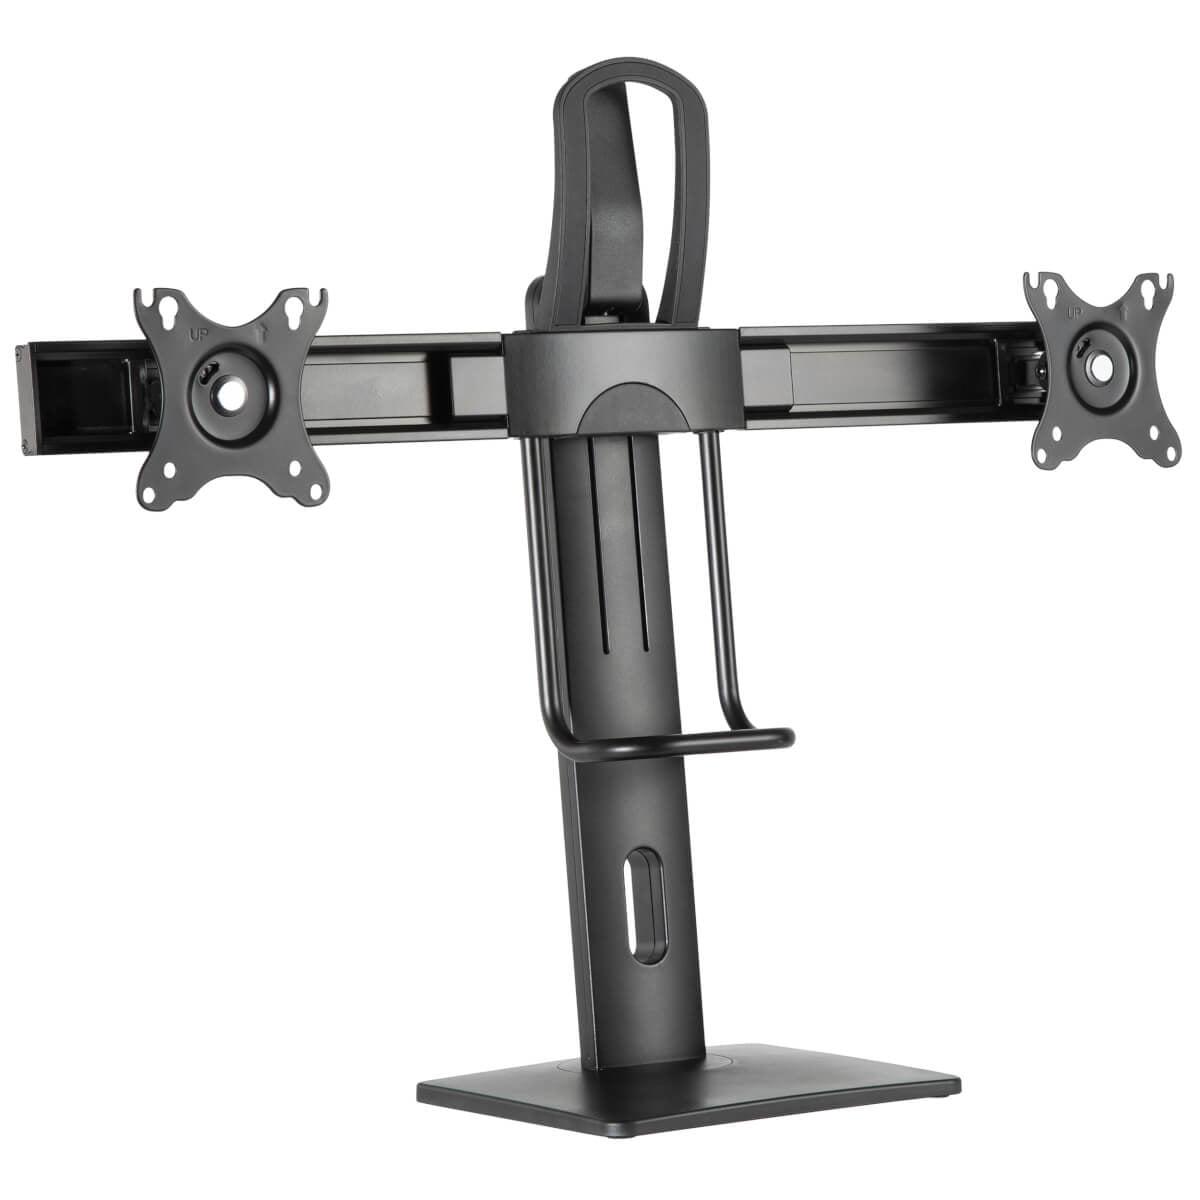 Tripp Lite Ddvd1727Am Safe-It Precision-Placement Desktop Mount With Antimicrobial Tape For 17” To 27” Displays